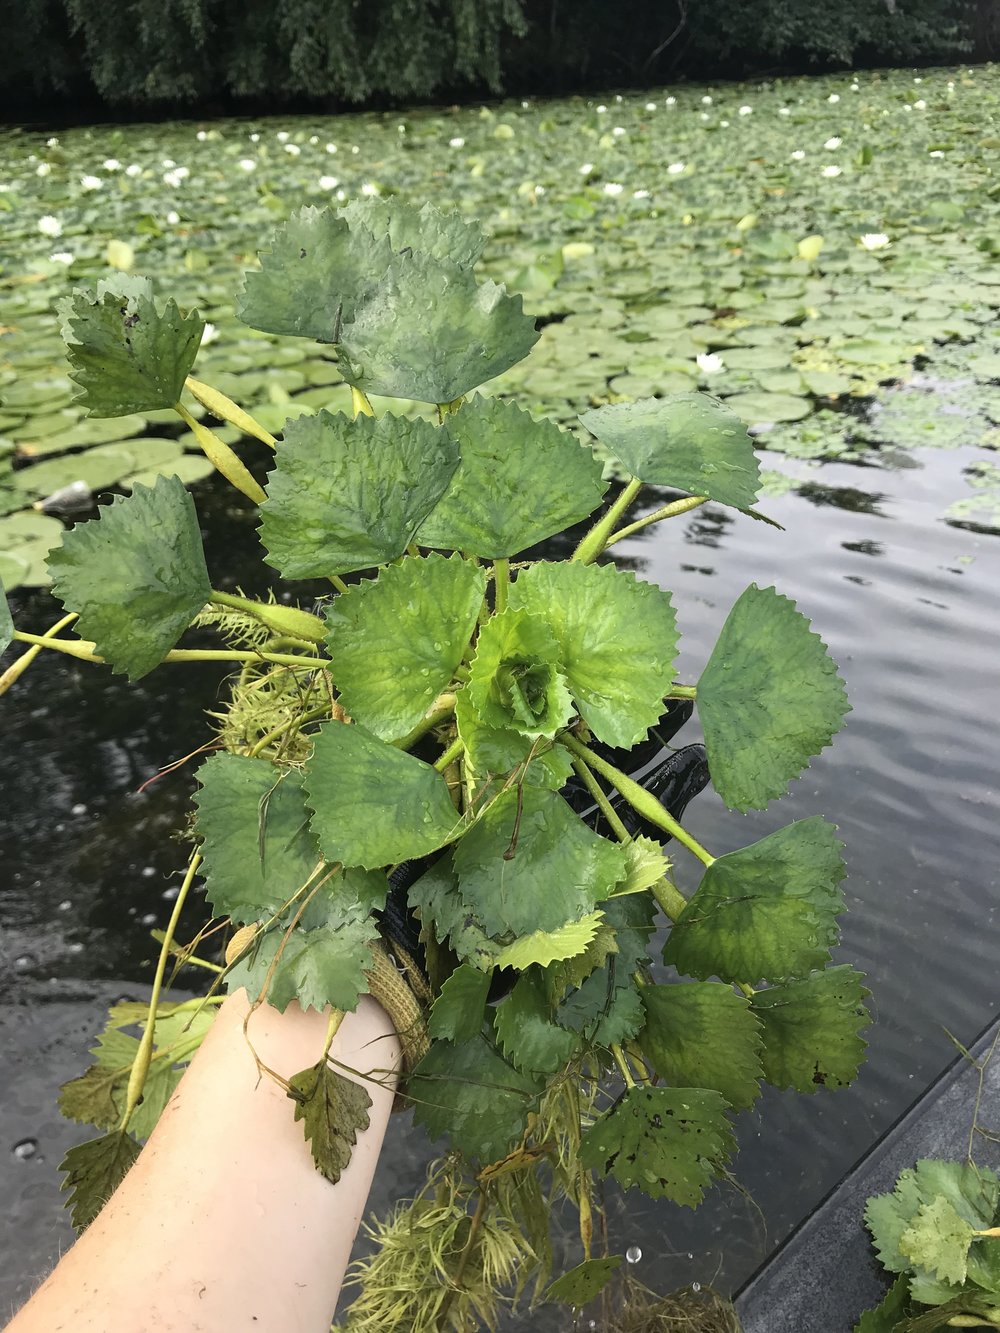 Volunteers needed to control and eliminate water chestnut at Lake Mansfeild